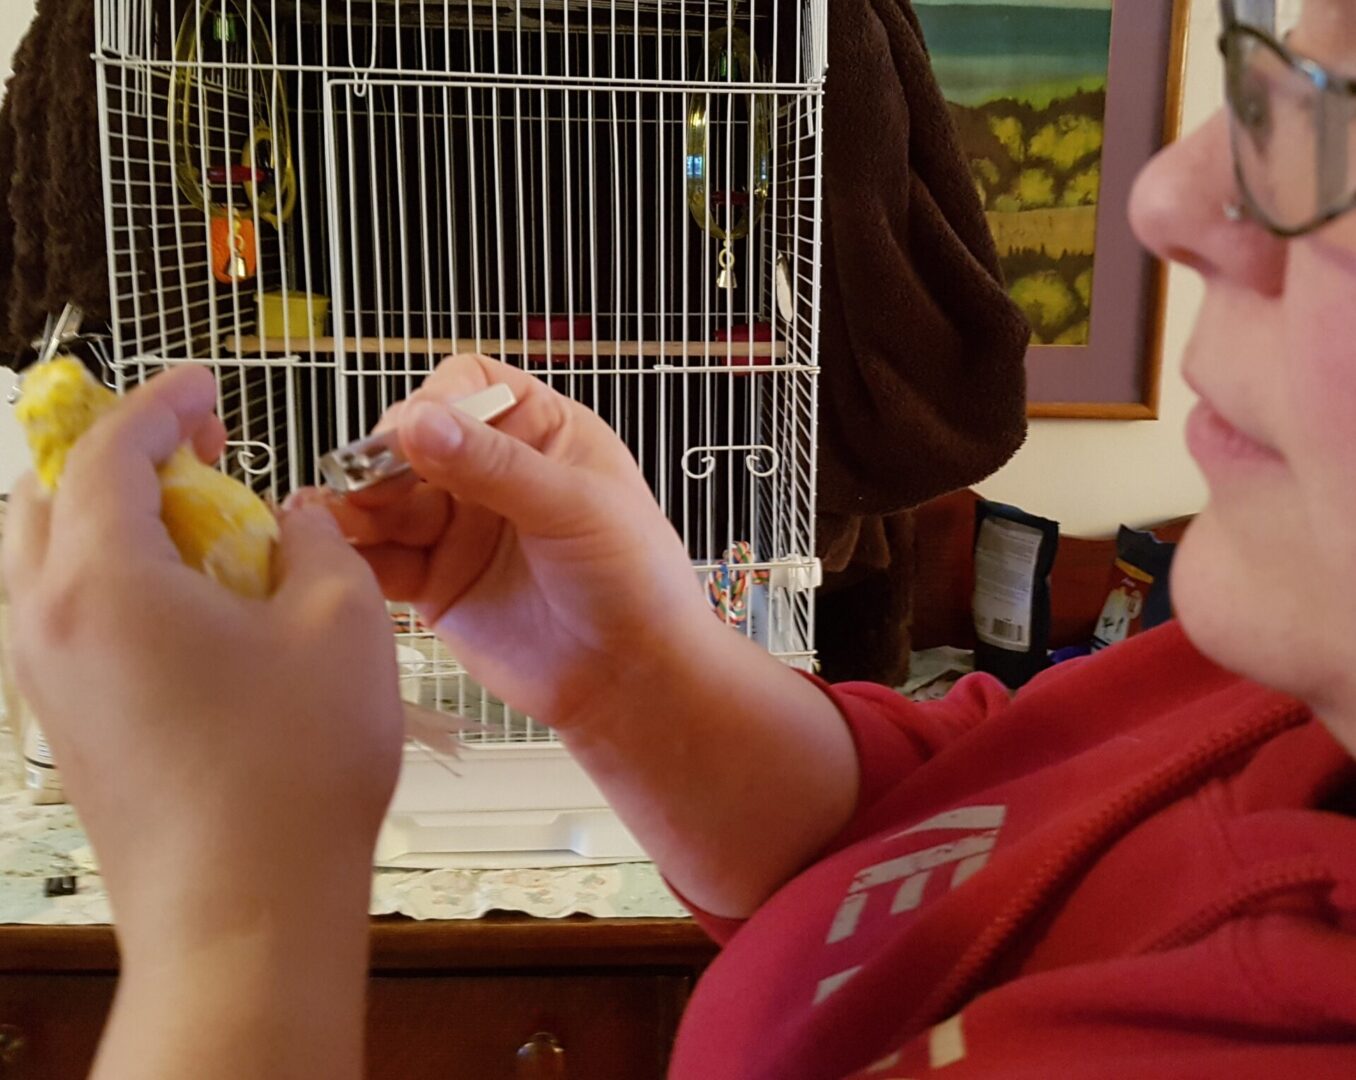 A person holding a banana in front of a bird cage.